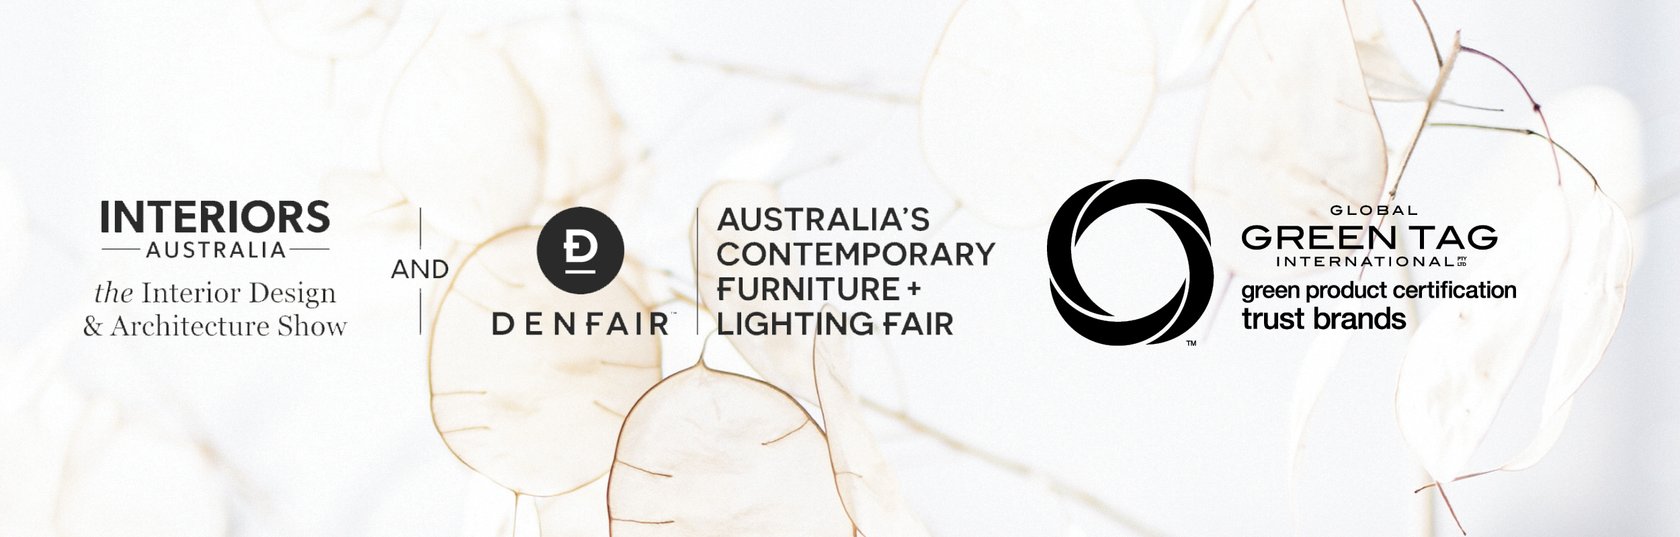 Interiors Australia & DENFAIR Partner Up with Global GreenTag International to Highlight Australia’s Best Eco Products